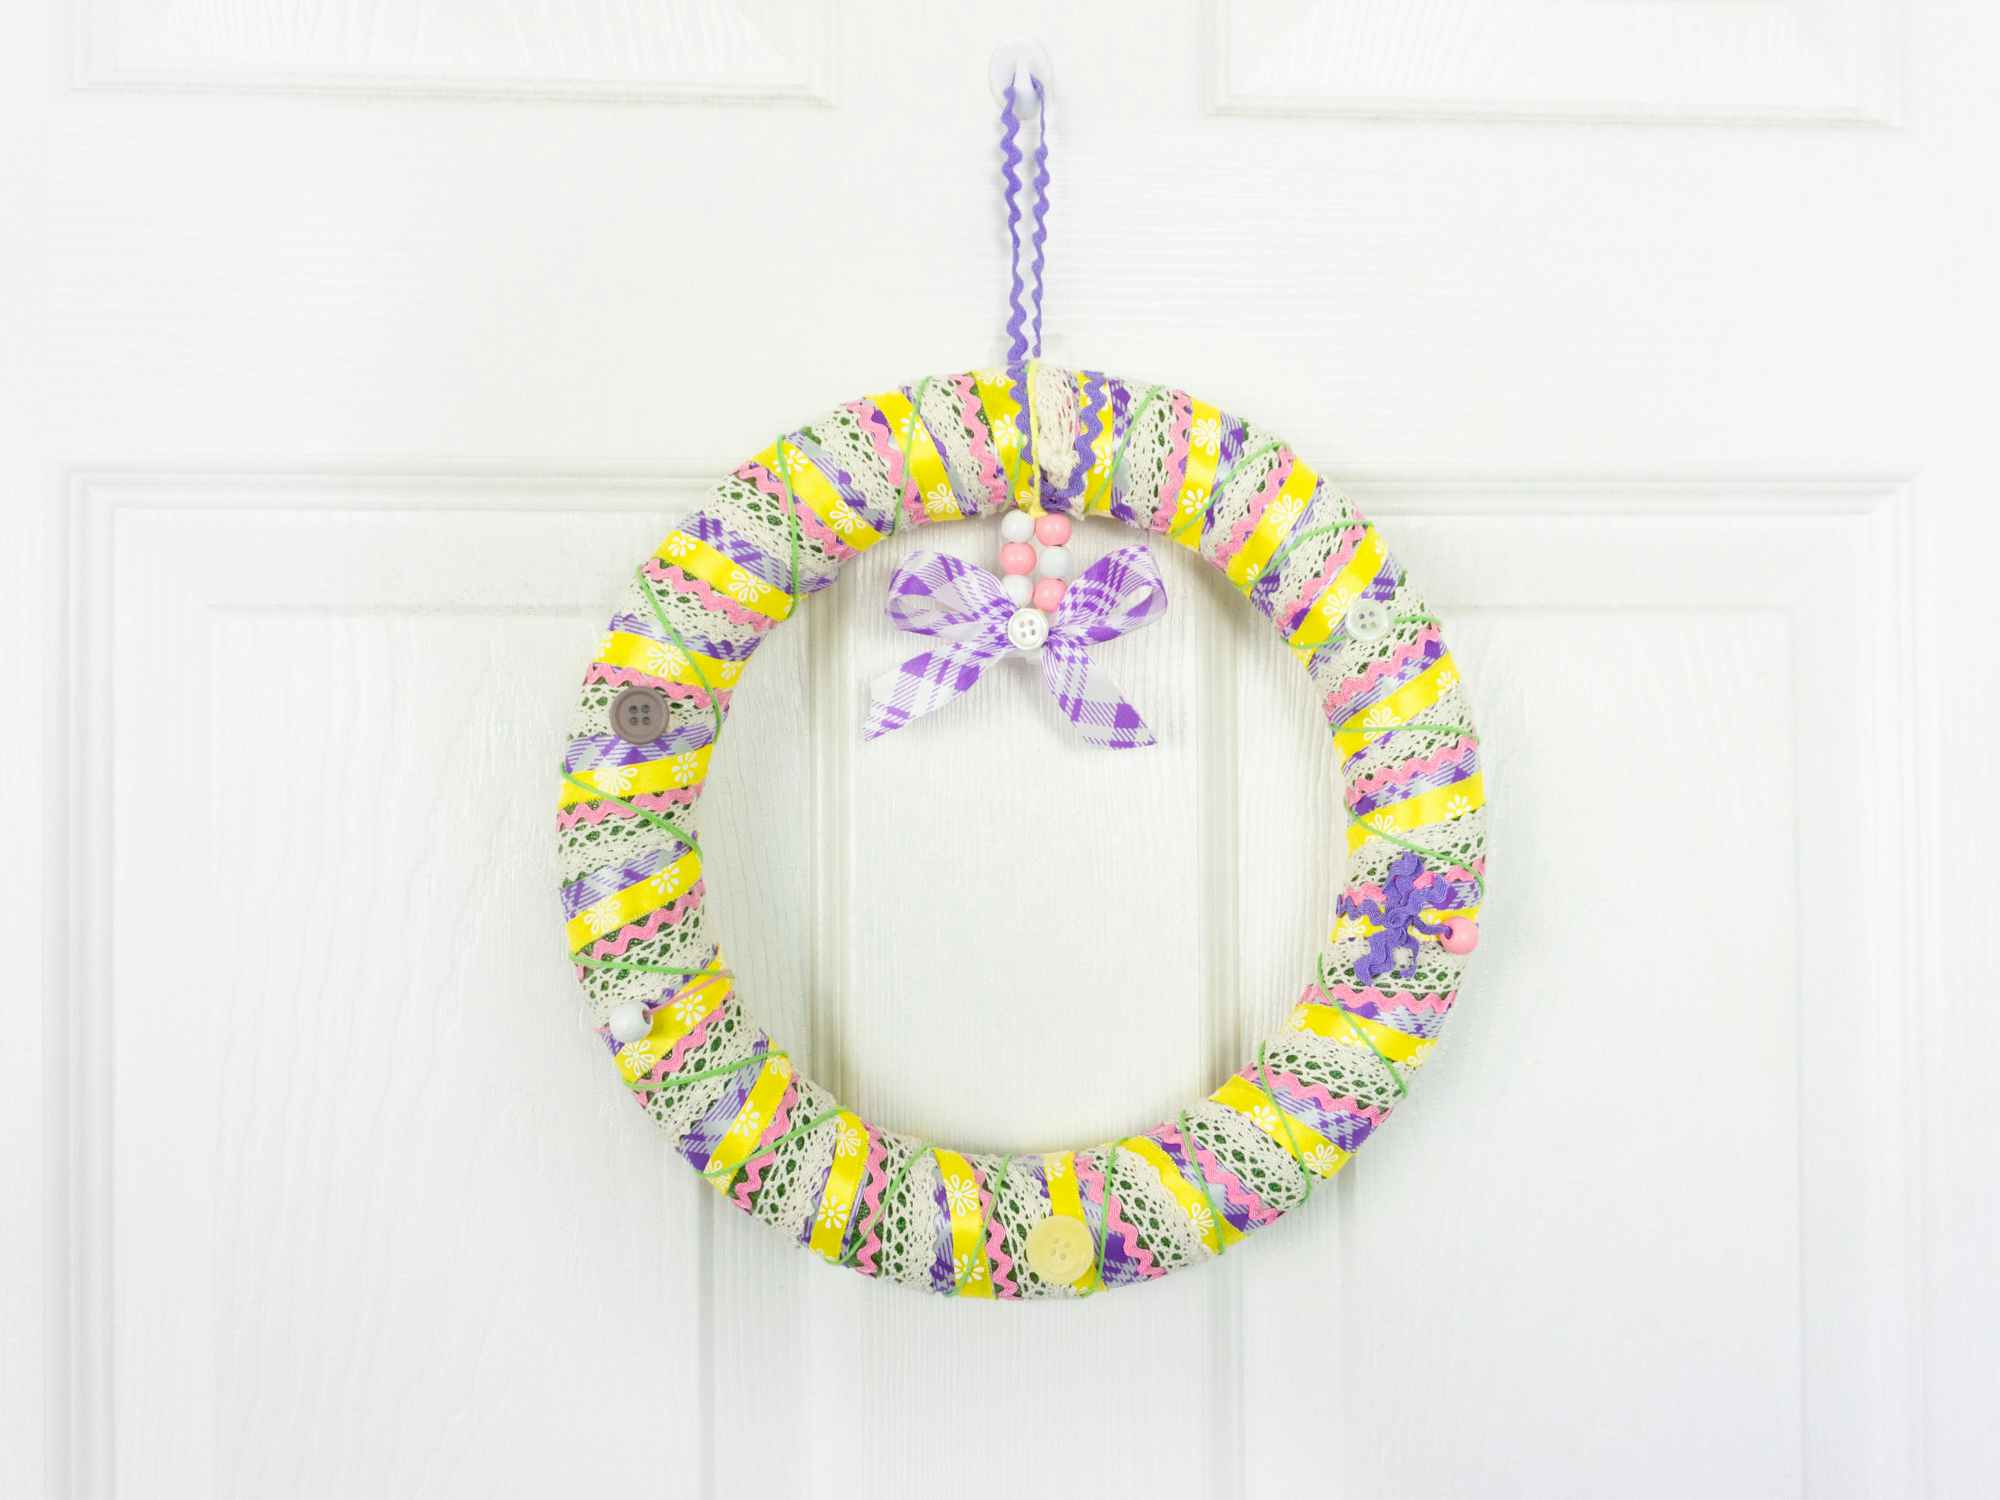 A completed ribbon wrapped wreath hanging on a white door